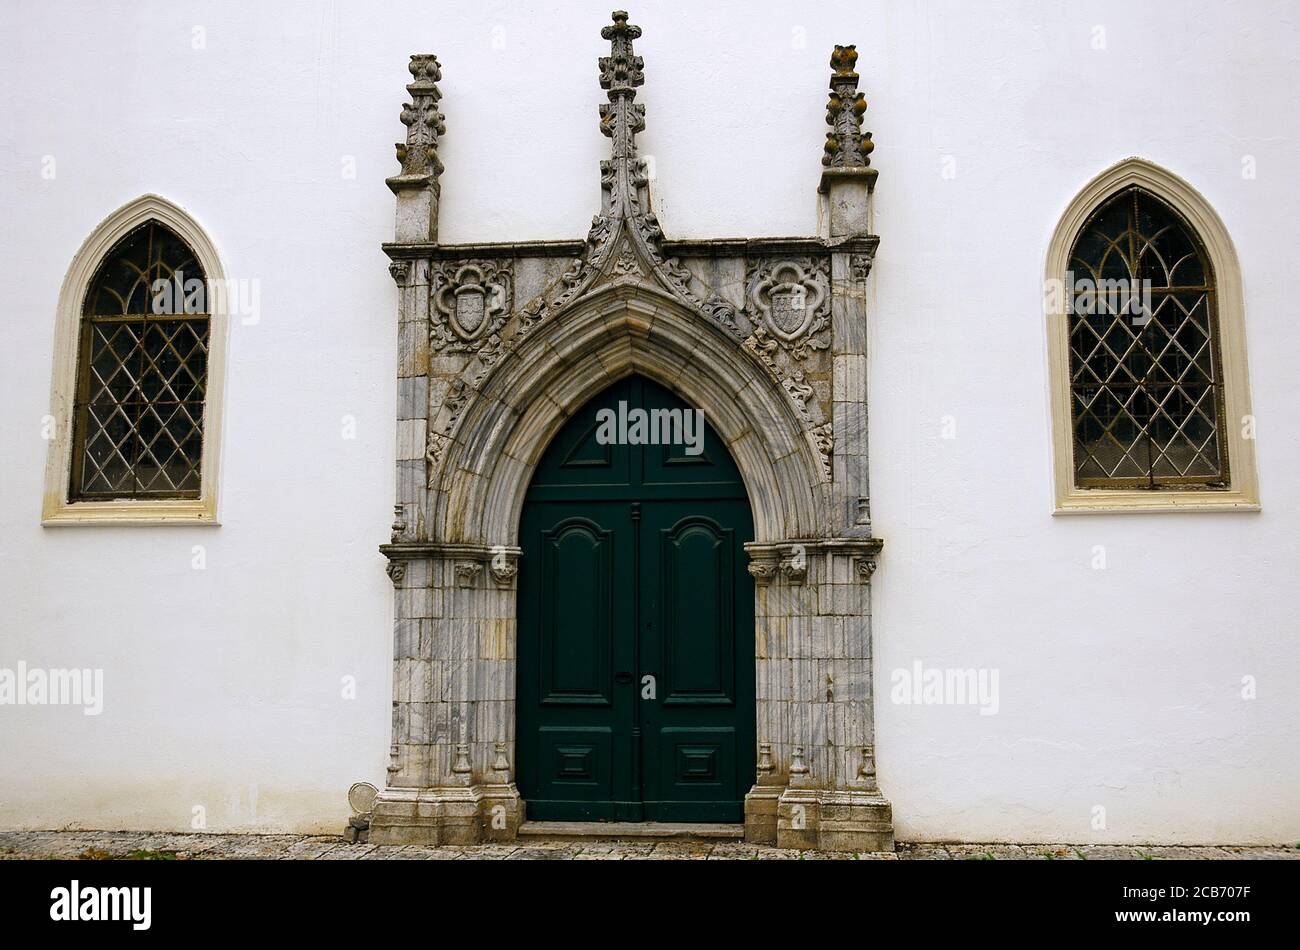 Portugal, Alentejo region, Beja. Convent of Our Lady of the Conception (Convento de Nossa Senhora da Conceiçao), a congregation of Poor Clares. It was founded in 1495. Today Museum Rainha Dona Leonor. View of one of the doors. Stock Photo